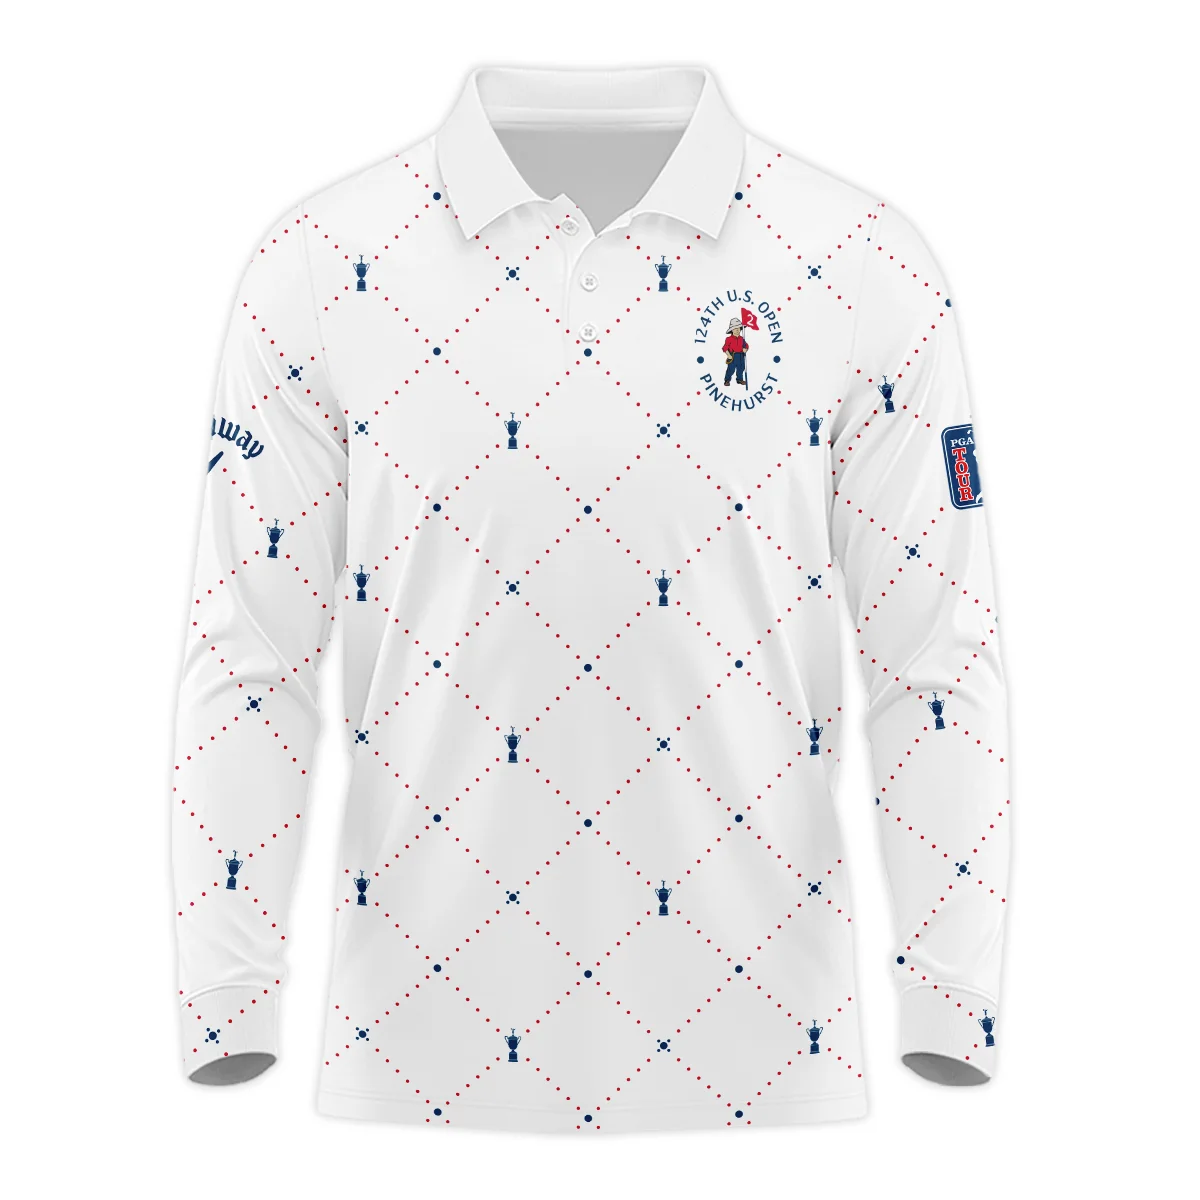 Argyle Pattern With Cup 124th U.S. Open Pinehurst Callaway Vneck Polo Shirt Style Classic Polo Shirt For Men